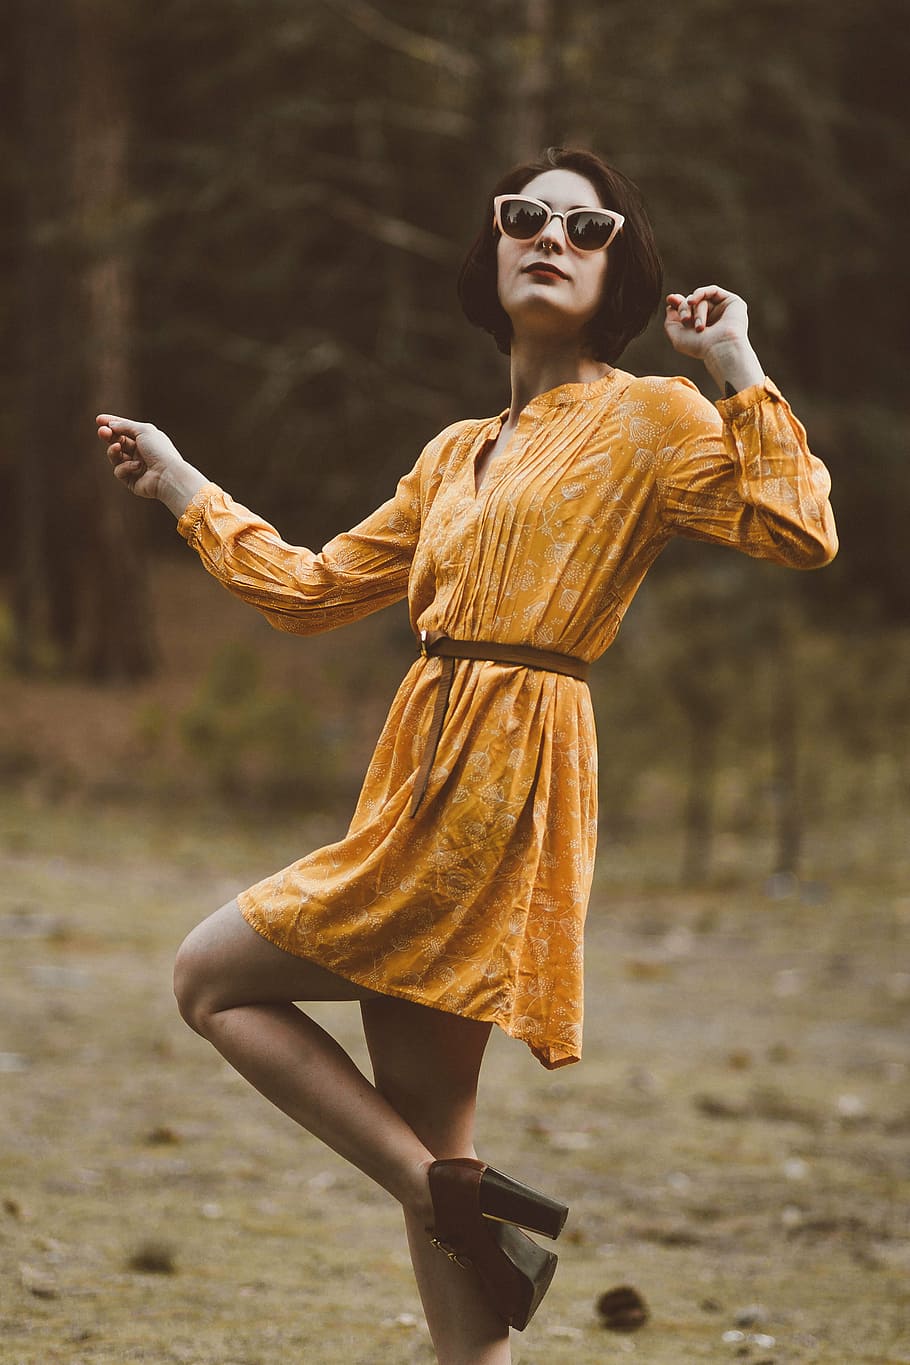 focus photography, woman, trees, people, fashion, yellow, dress, nature, woods, forest